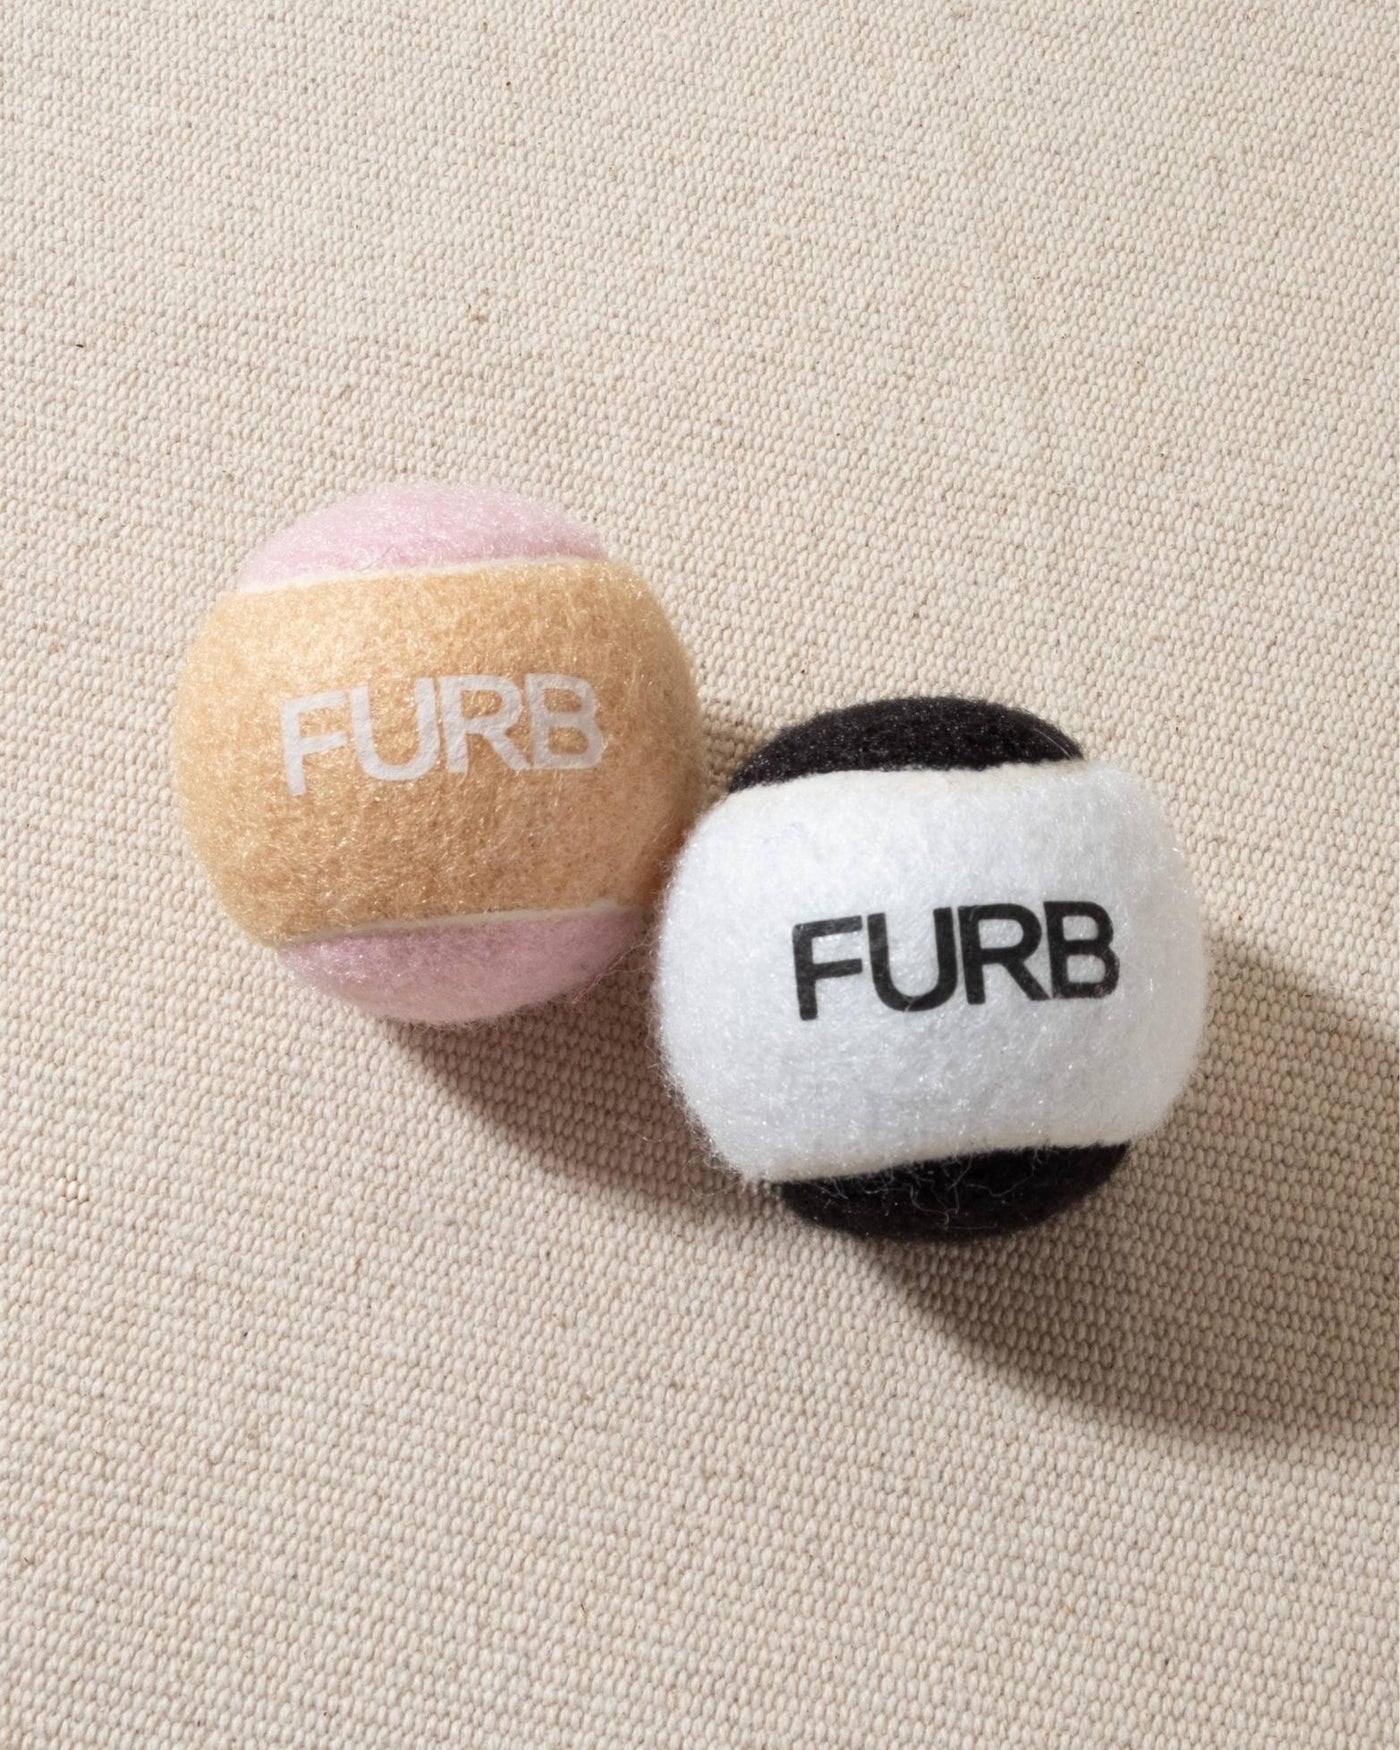 tan and blush tennis ball with white furb logo for dogs